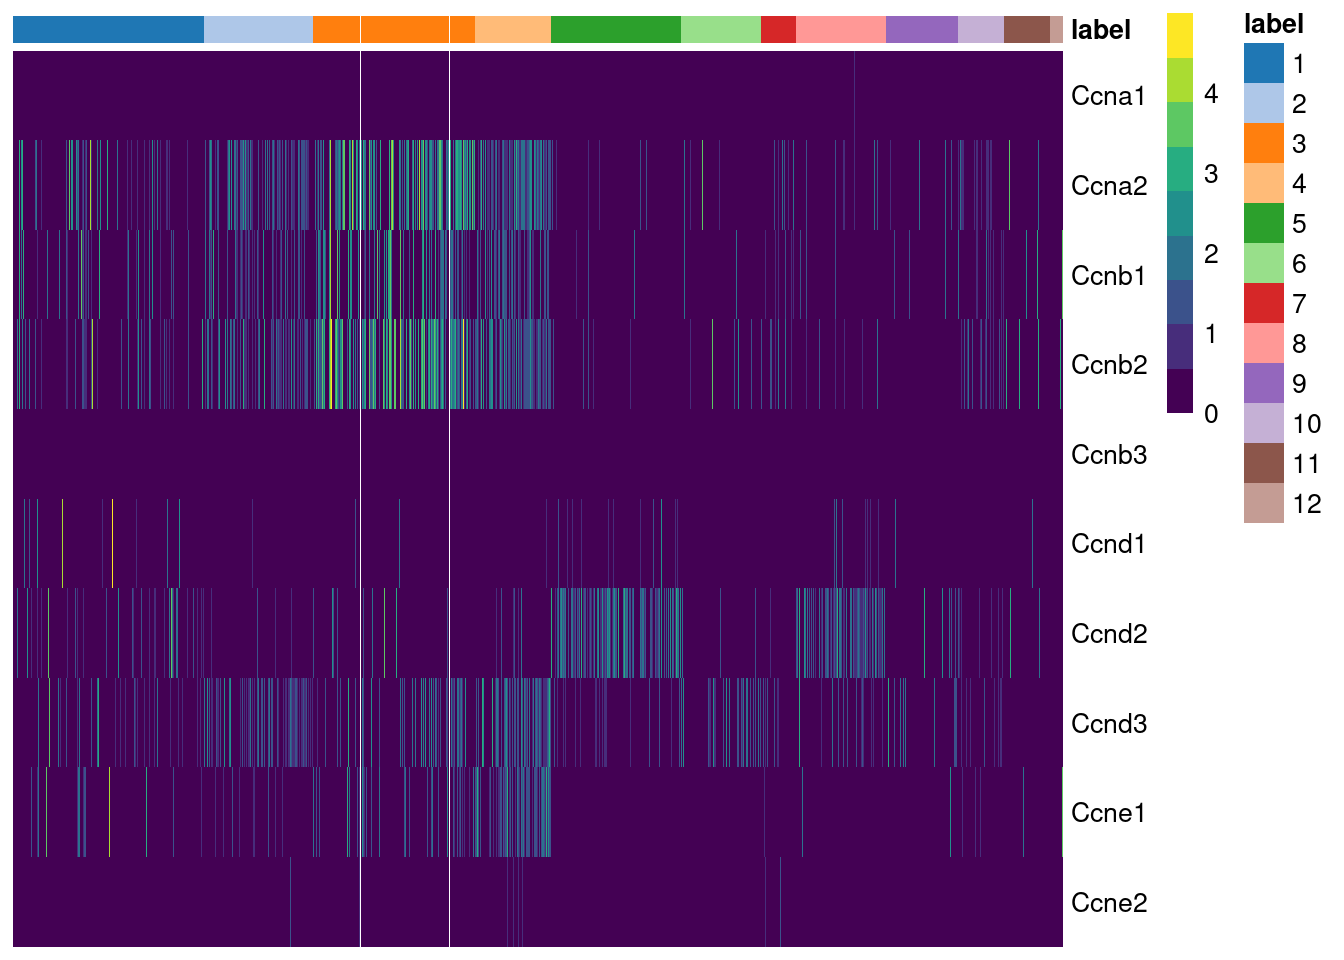 Heatmap of the log-normalized expression values of the cyclin genes in the Grun HSC dataset. Each column represents a cell that is sorted by the cluster of origin and extraction protocol.